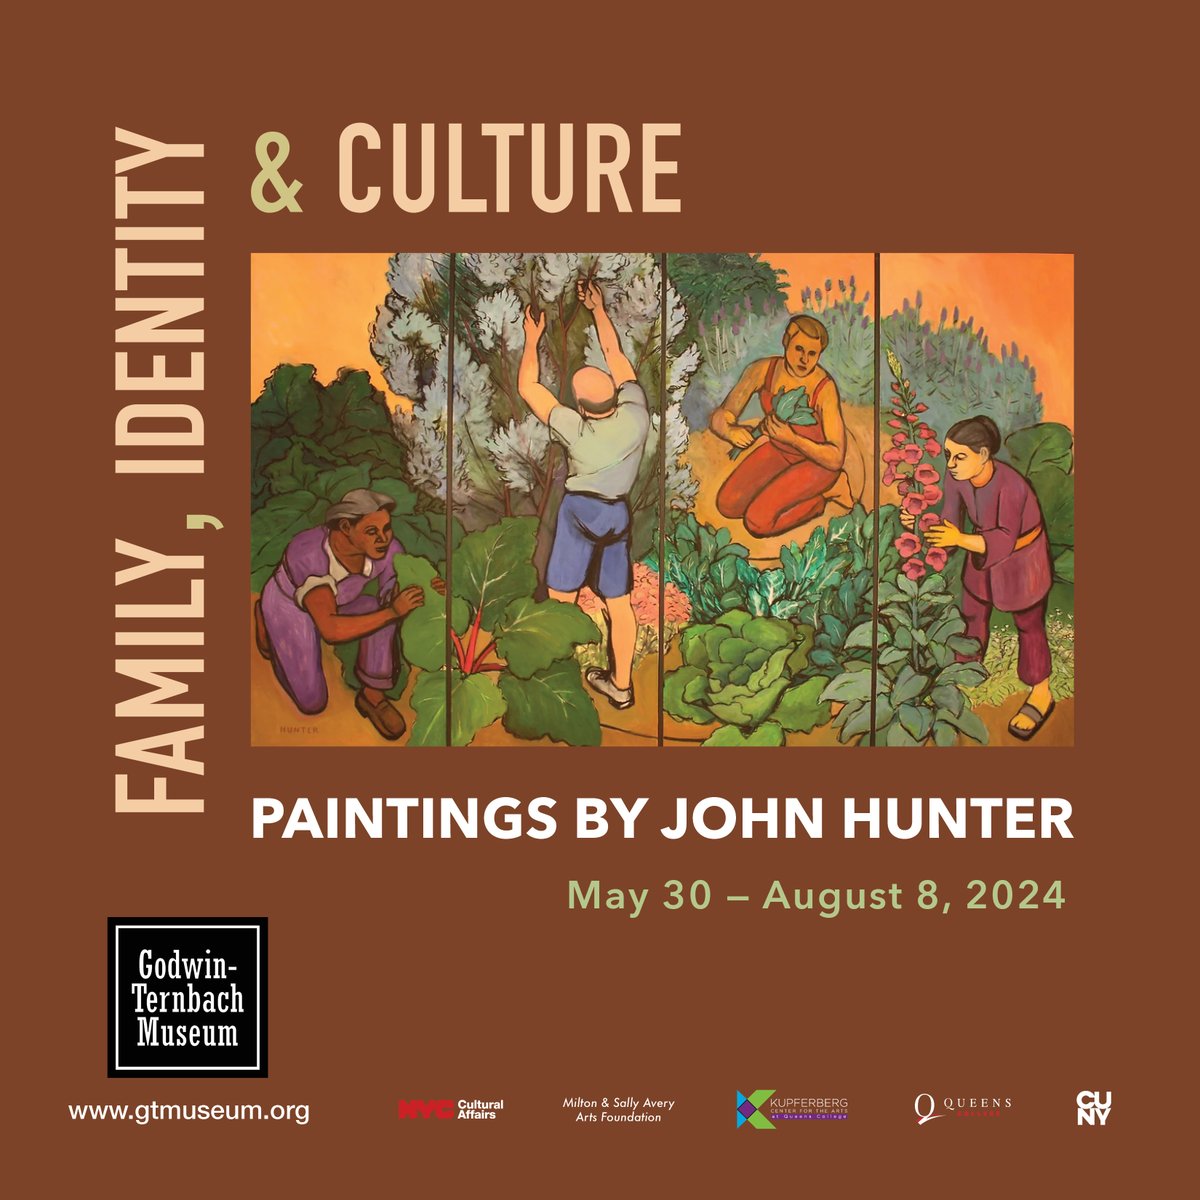 Coming soon! We are preparing our next exhibition - 'Family, Identity, and Culture: Paintings by John Hunter.' Immerse yourself in John Hunter's world view as we explore themes of family, identity, and culture in his glorious paintings. #GodwinTernbachMueum #GTM #JohnHunter